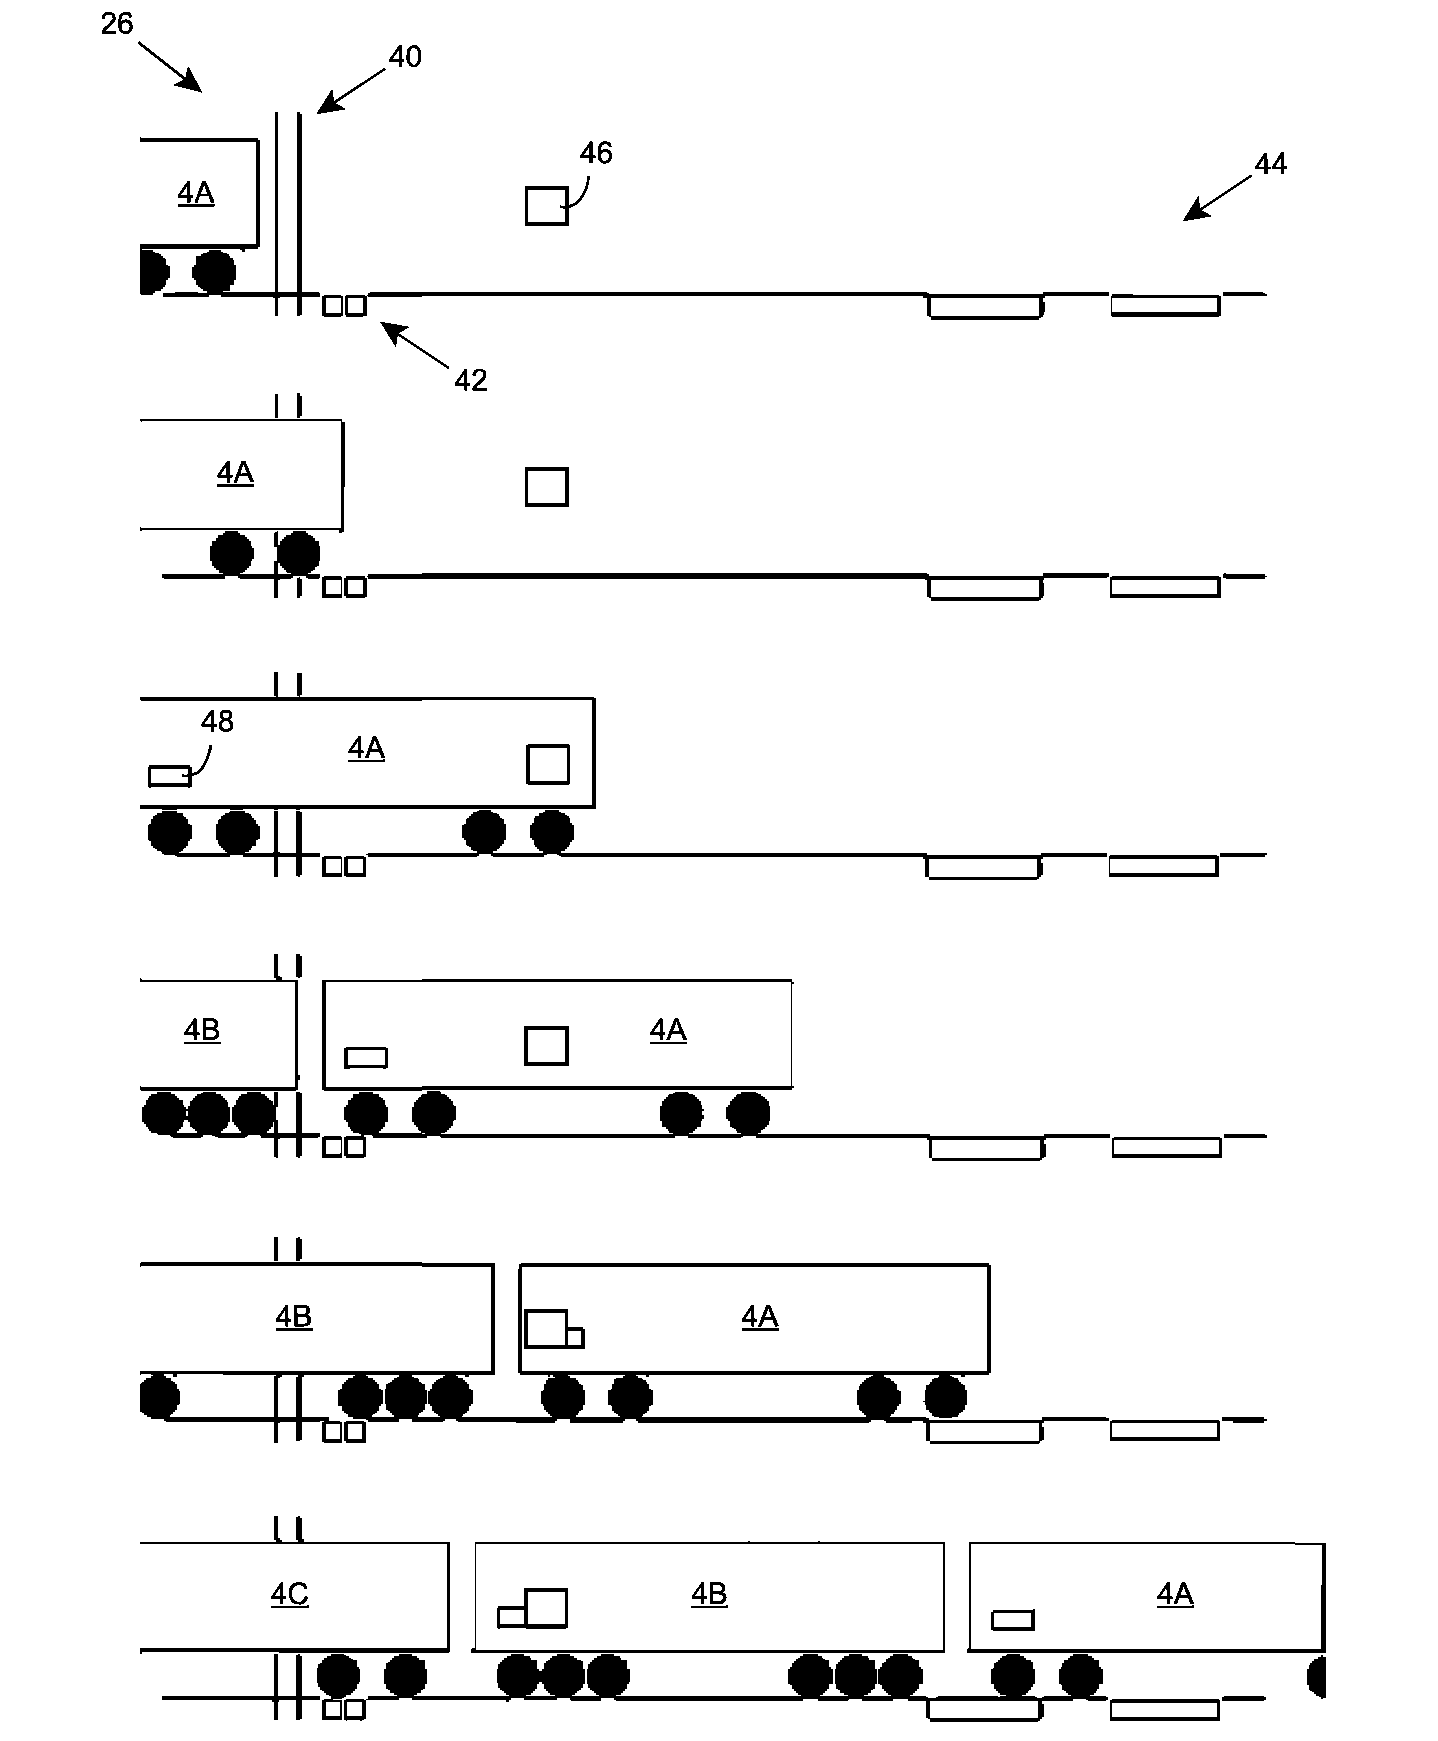 Rail vehicle identification and processing